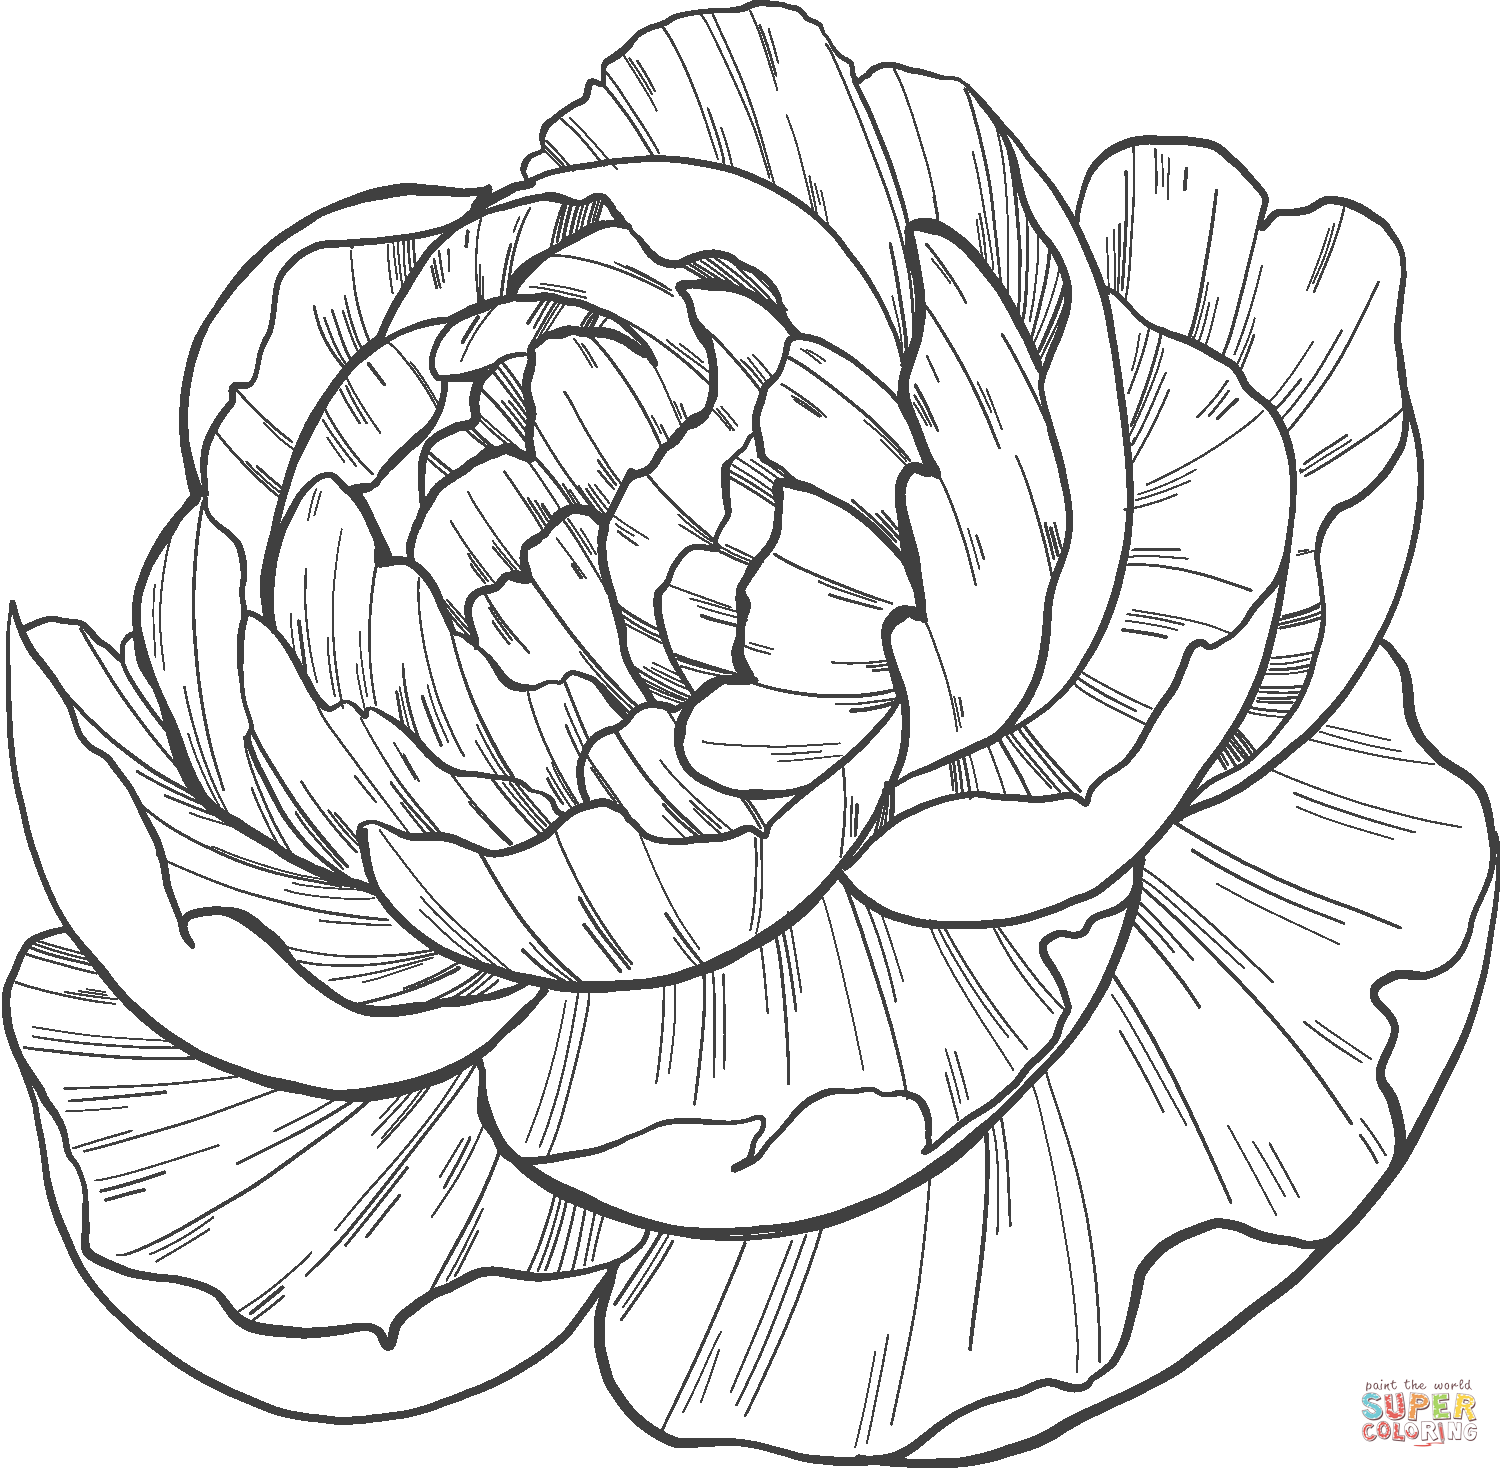 Peony coloring page | Free Printable Coloring Pages